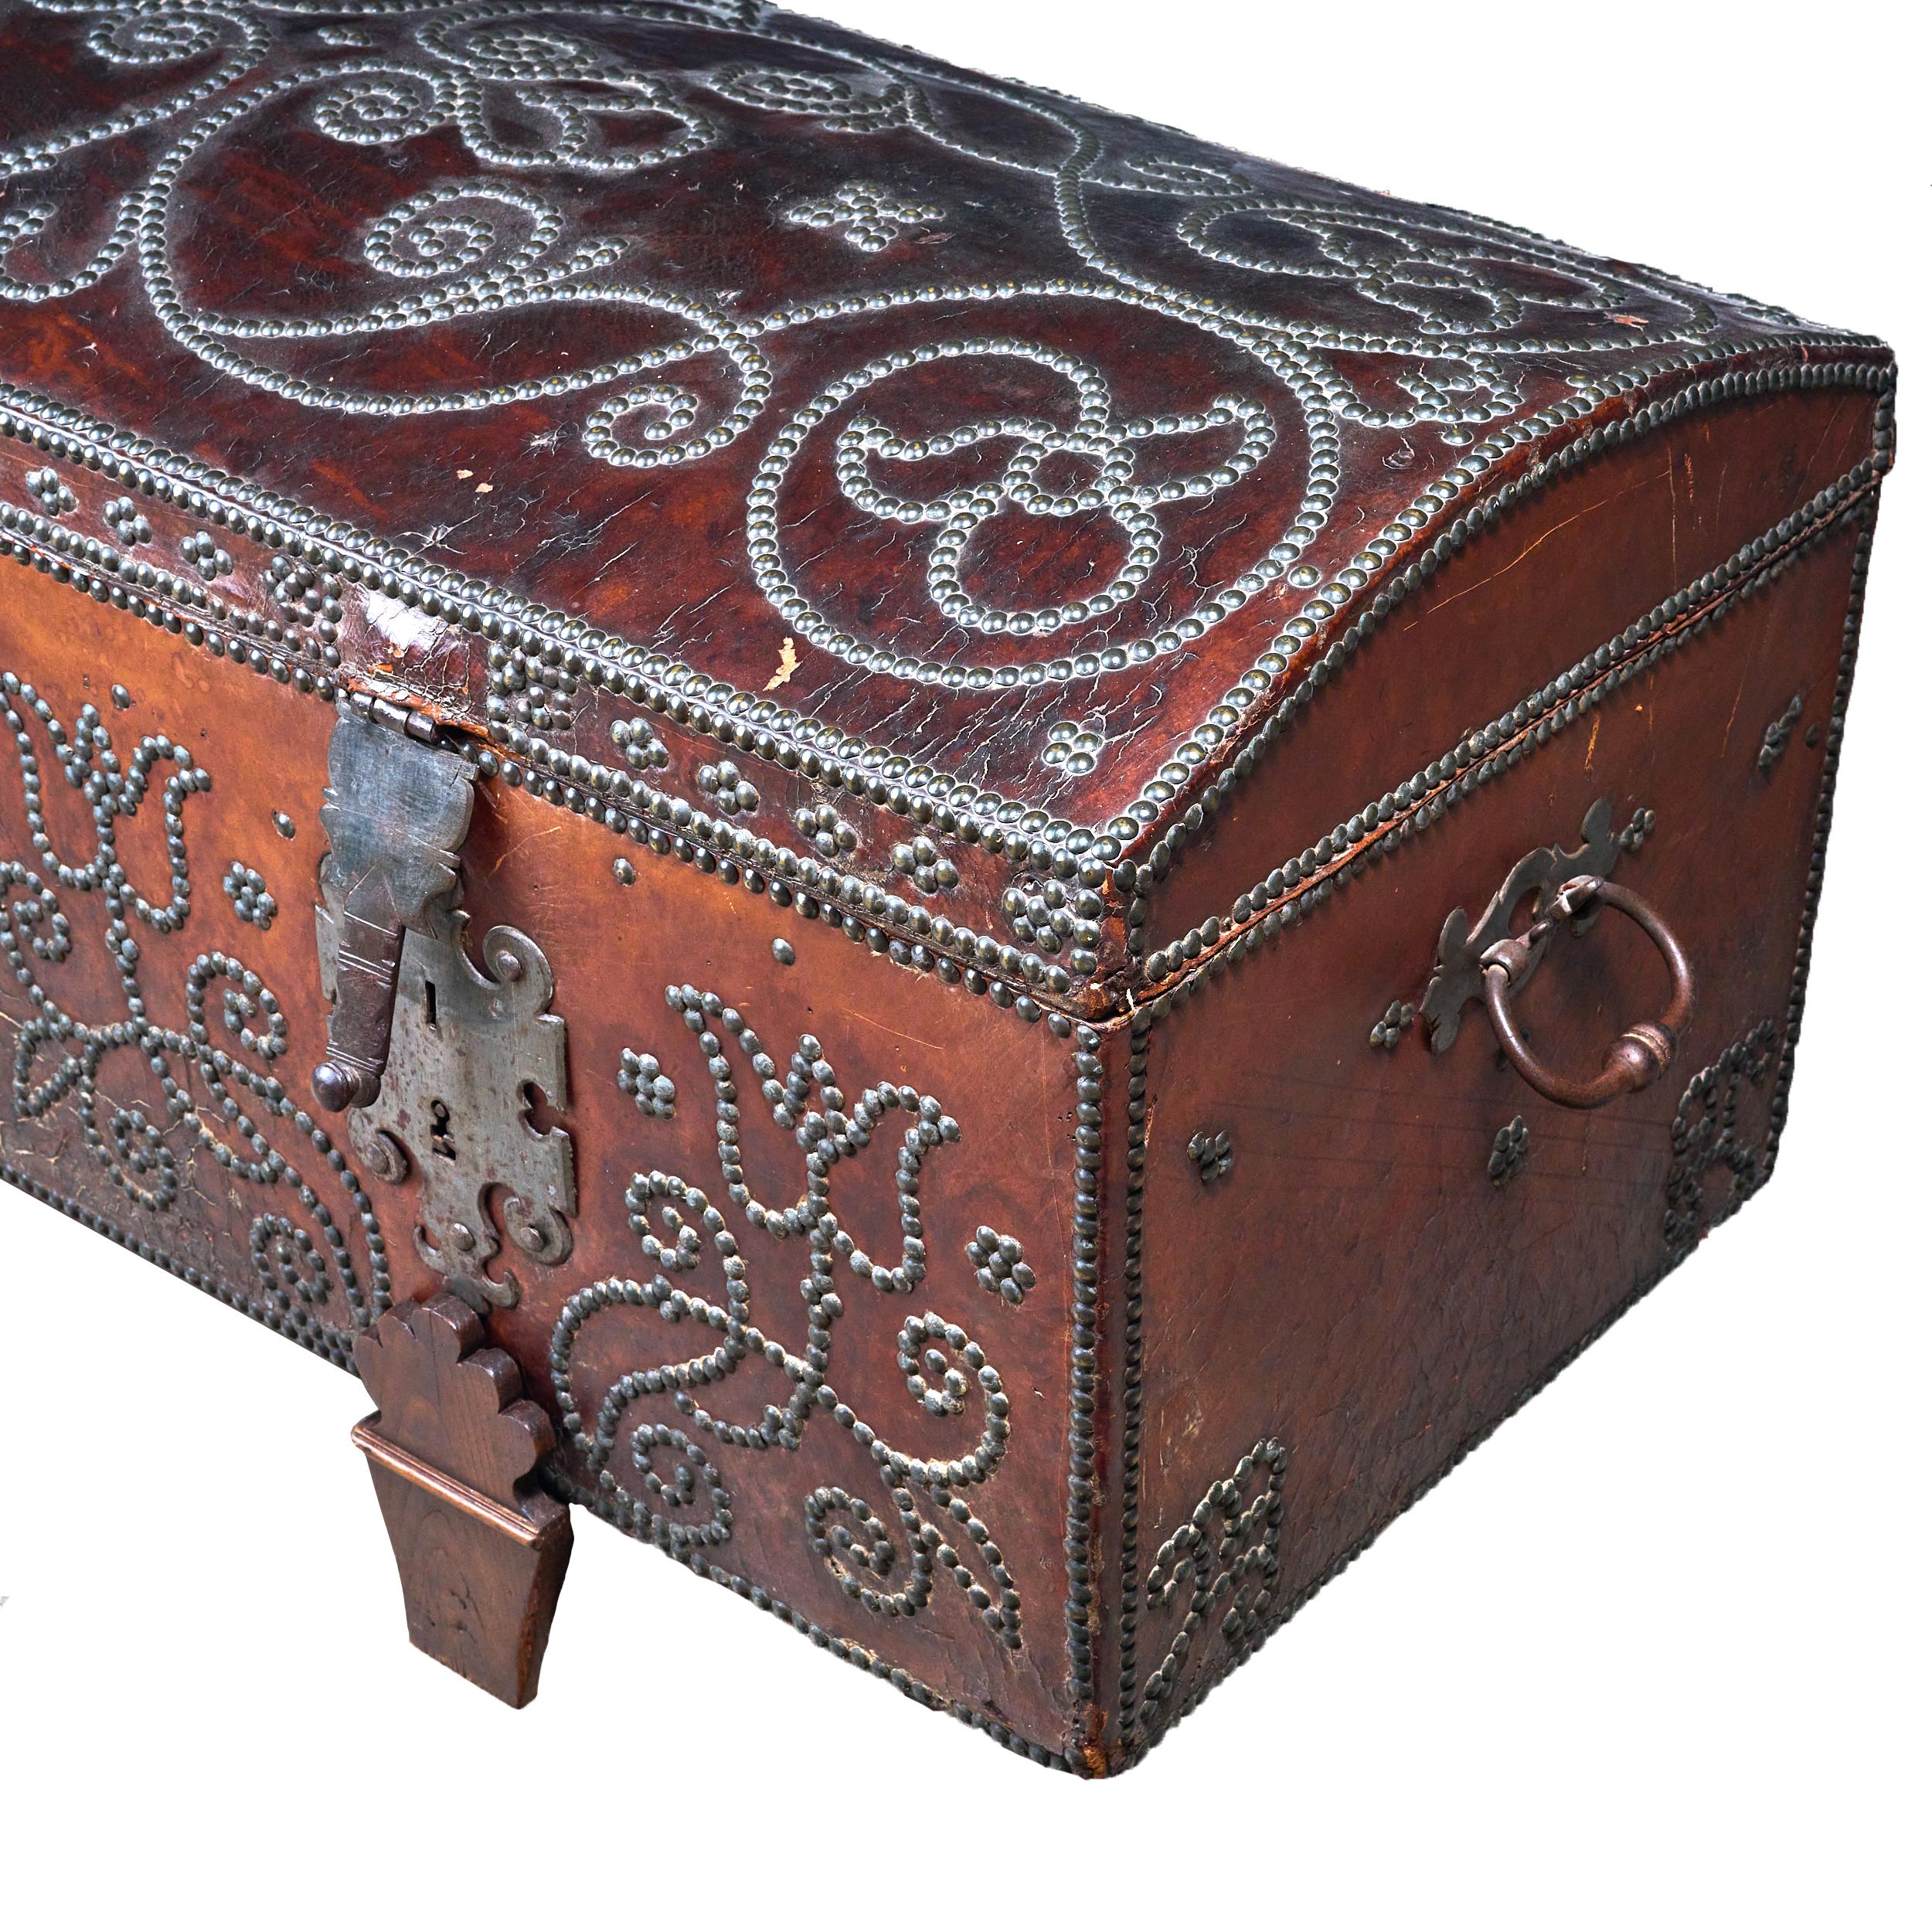 The best leather and studded decorative trunk on original stand. Rare and in excellent condition. Wonderful color and patina. 

